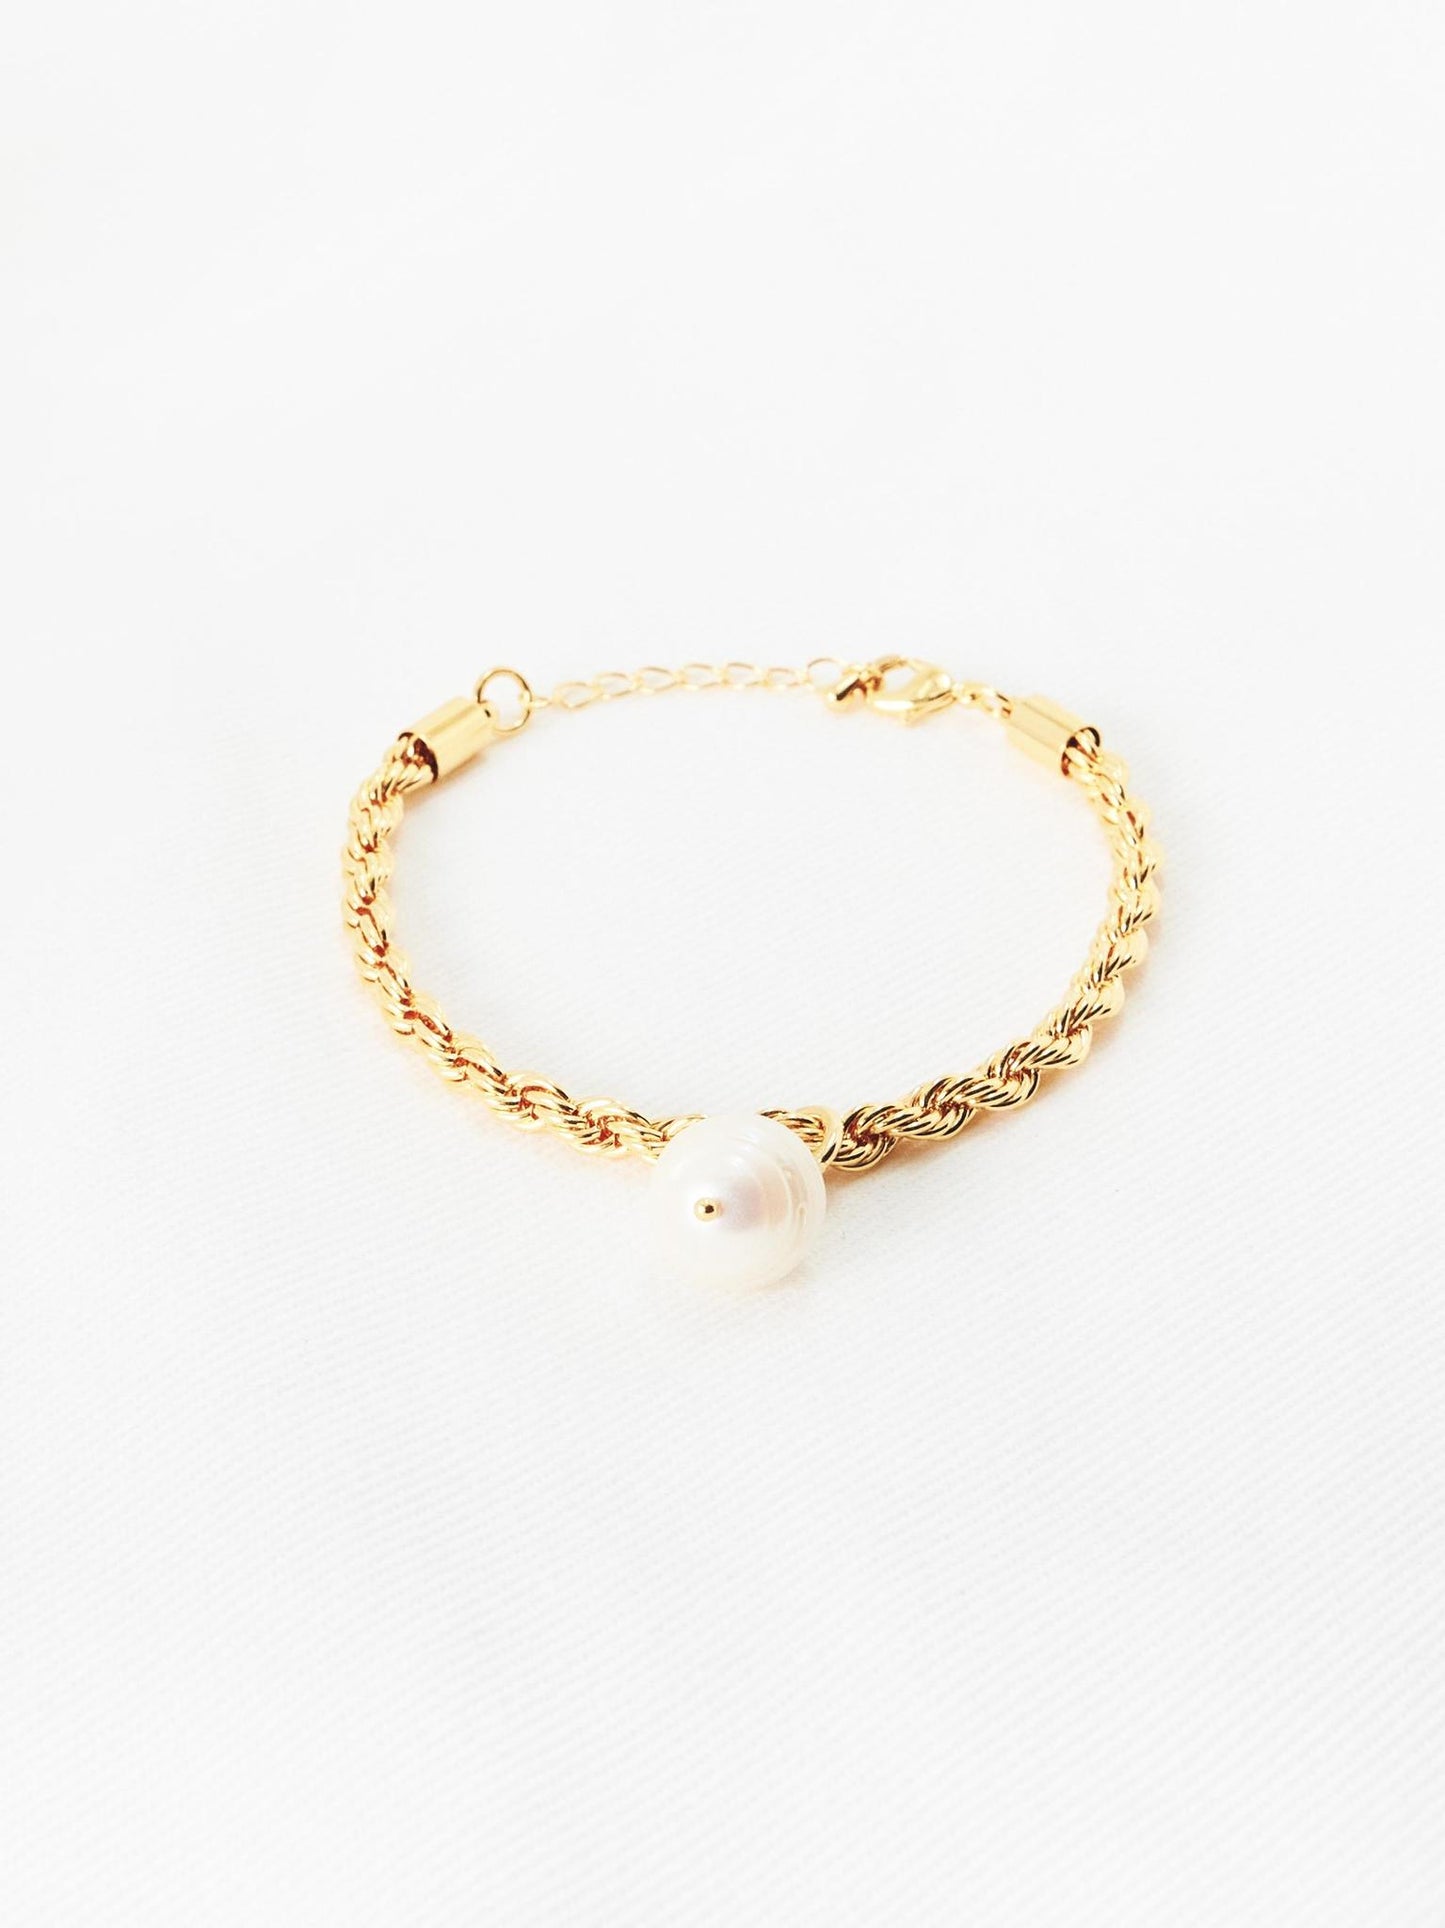 The Chain Pearl Bracelet